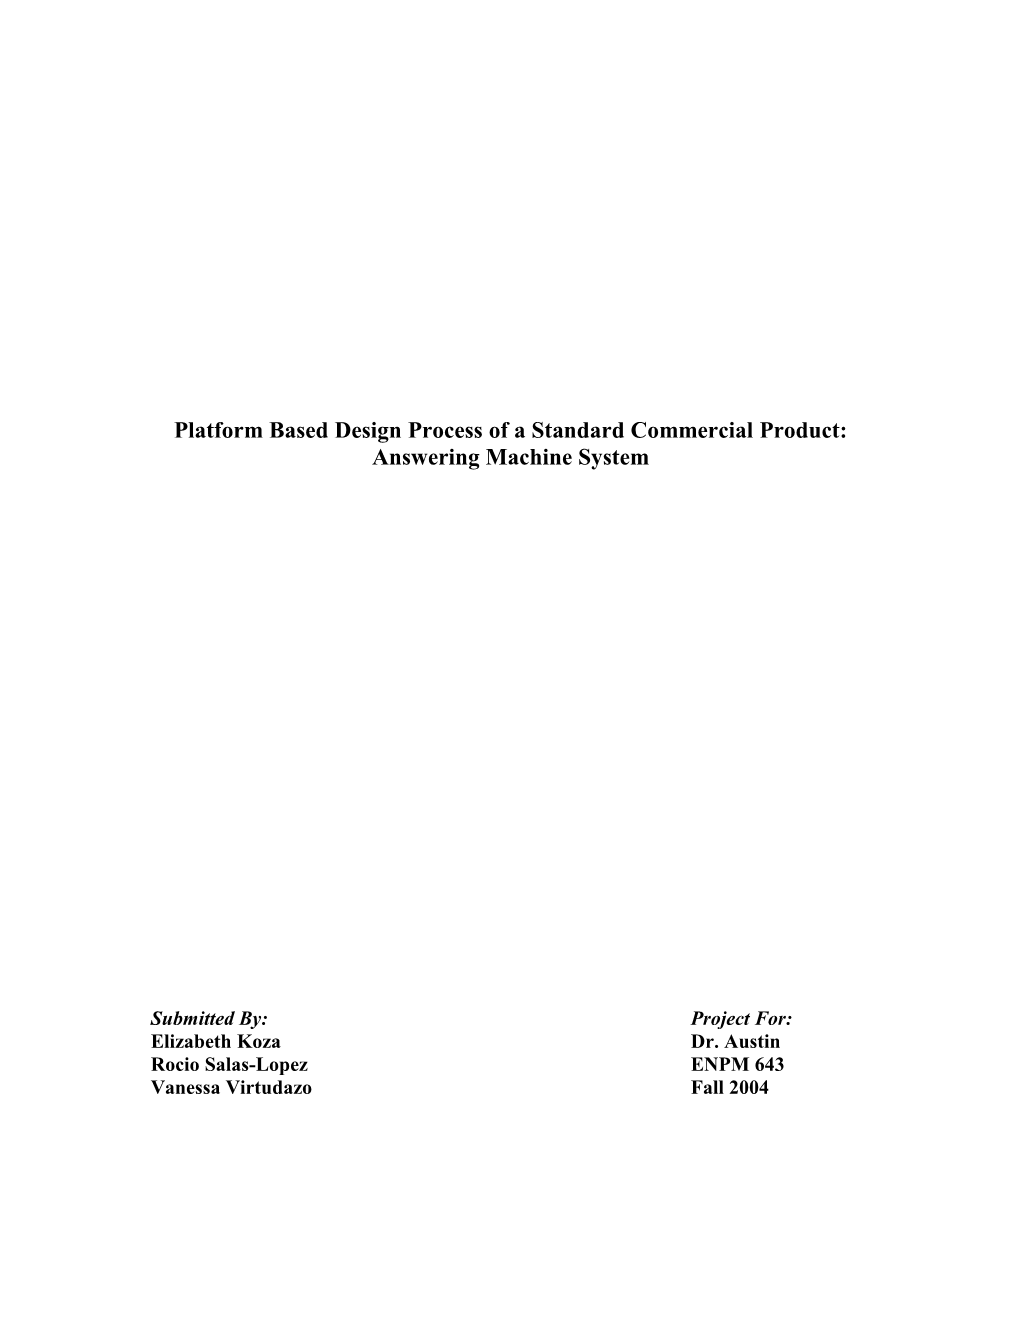 Platform Based Design Process of a Standard Commercial Product: Answering Machine System